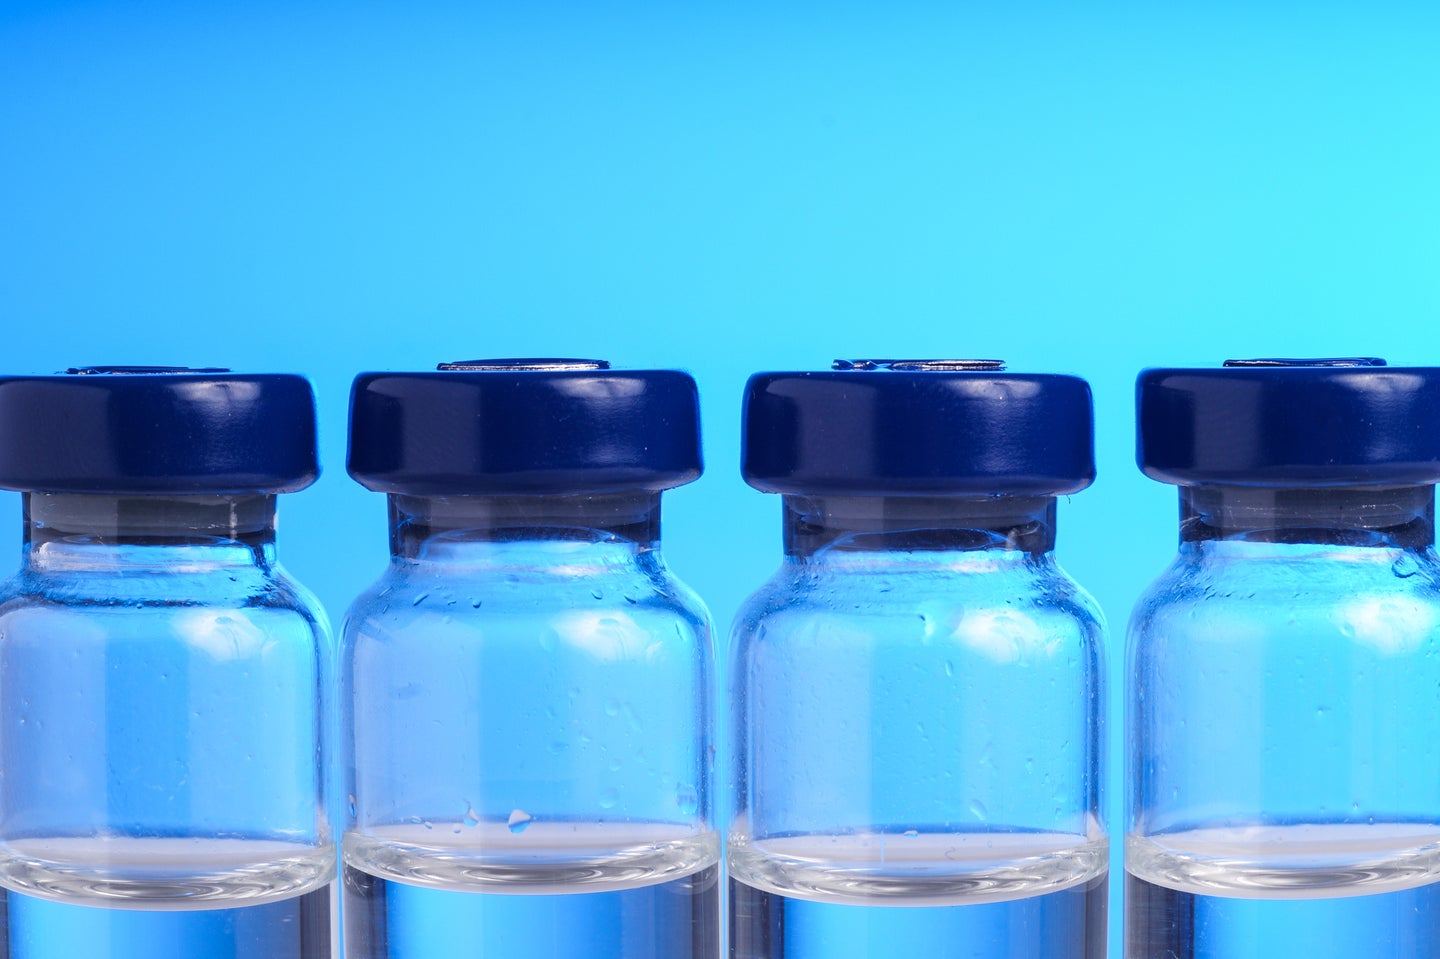 Unmarked vials to represent the COVID-19 vaccines in the US